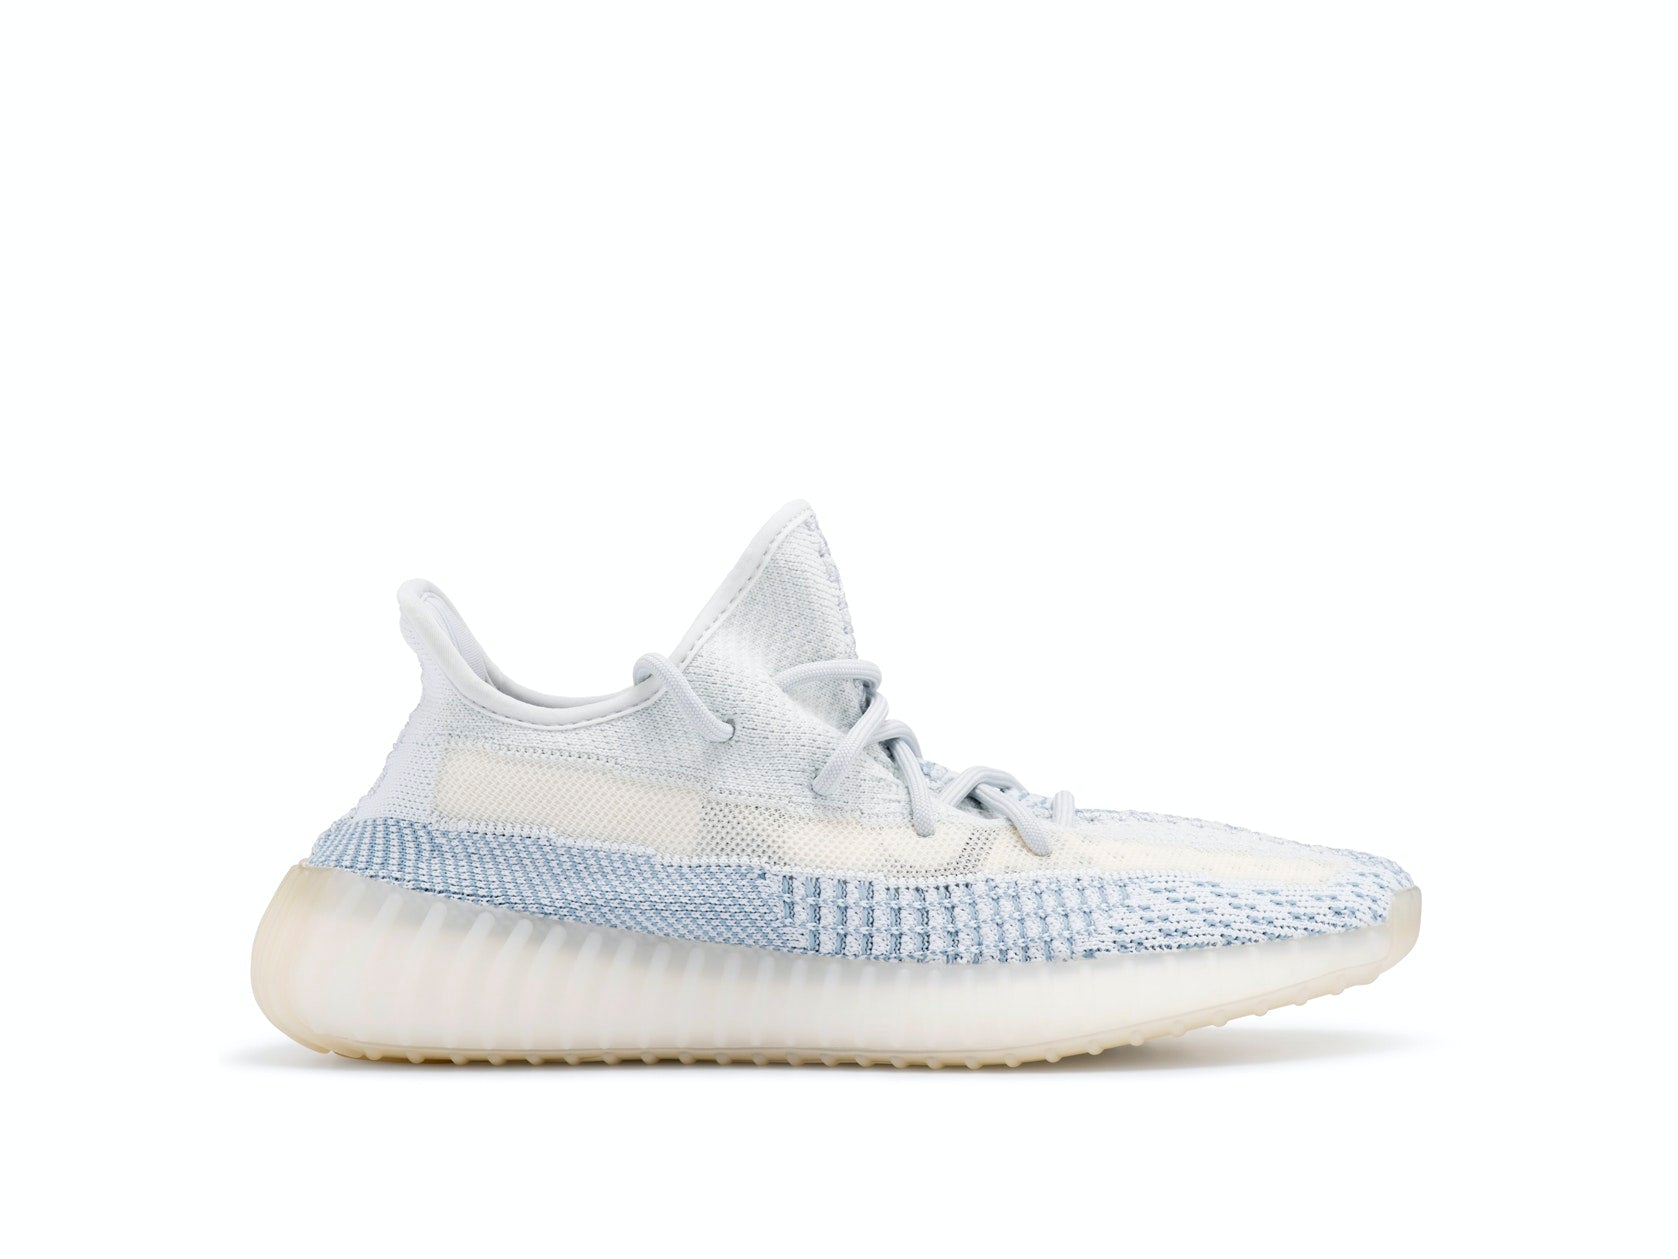 Double Boxed  550.00 adidas Yeezy Boost 350 V2 Cloud White (Non-Reflective) Double Boxed